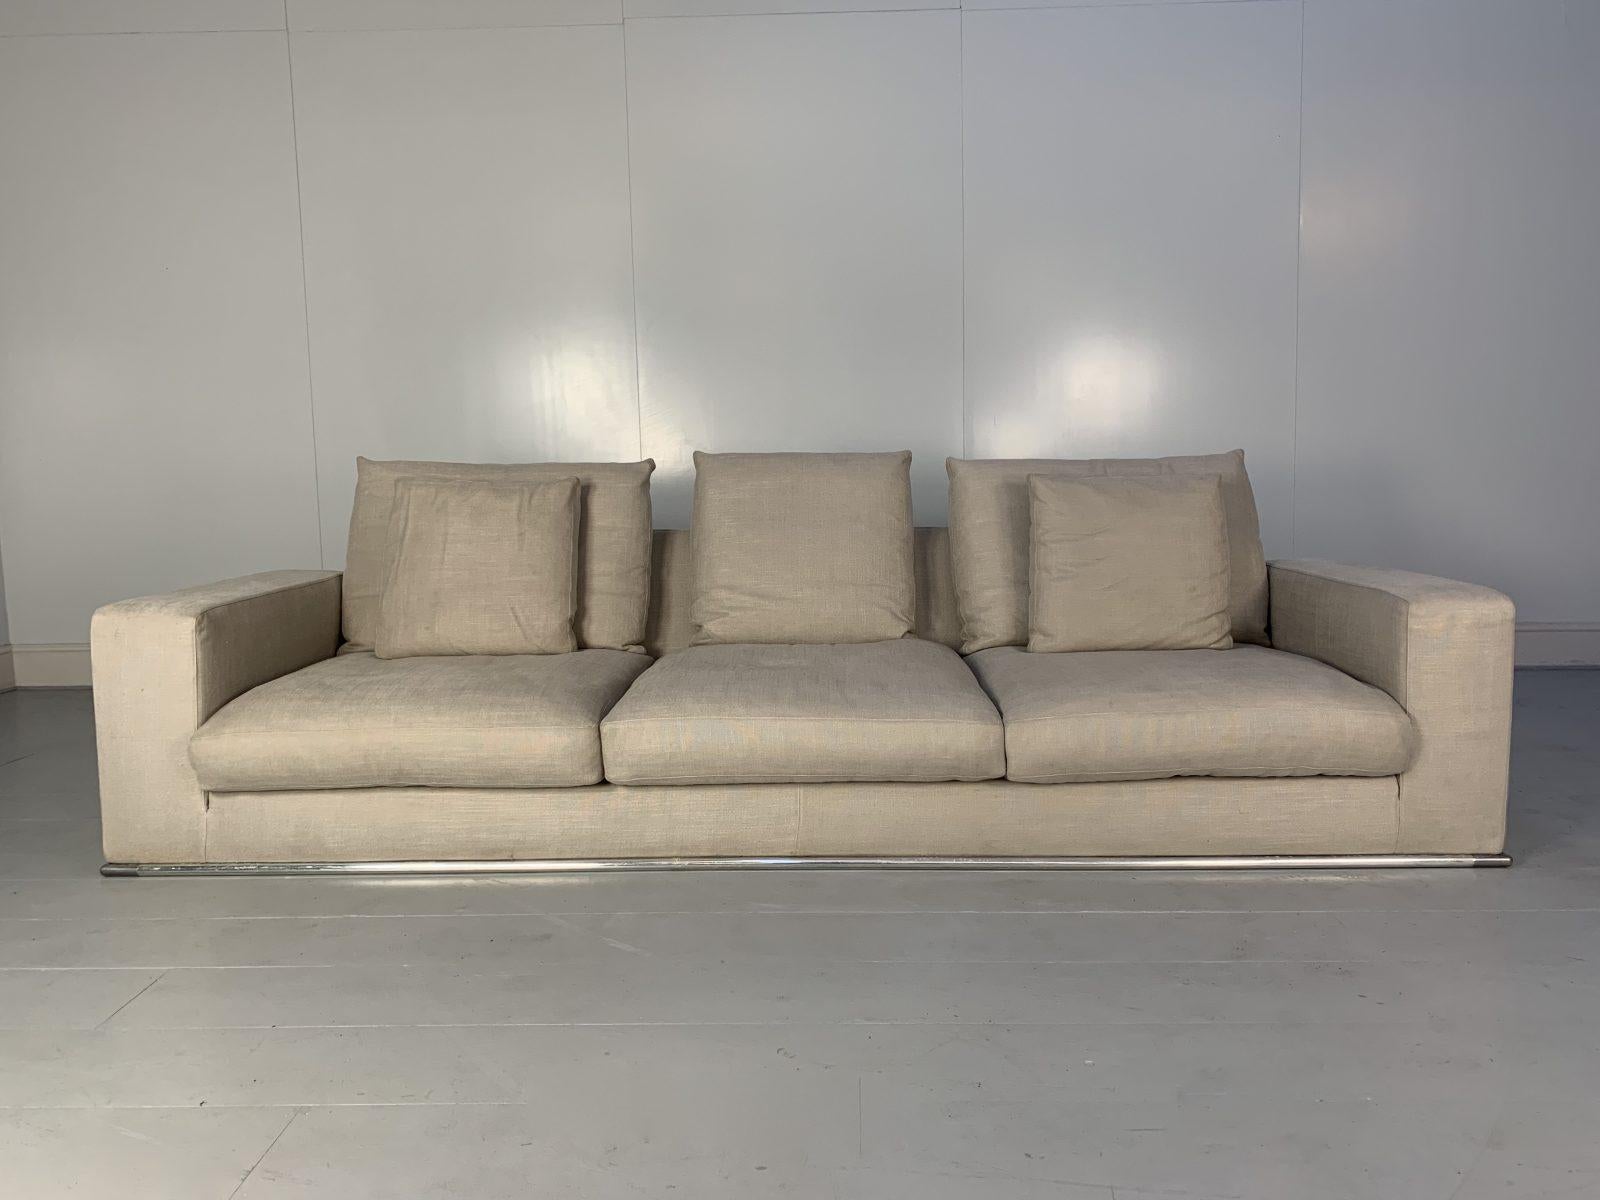 Hello Friends, and welcome to another unmissable offering from Lord Browns Furniture, the UK’s premier resource for fine Sofas and Chairs.

On offer on this occasion is superb, immaculately-presented example of large-scale seating, it being a